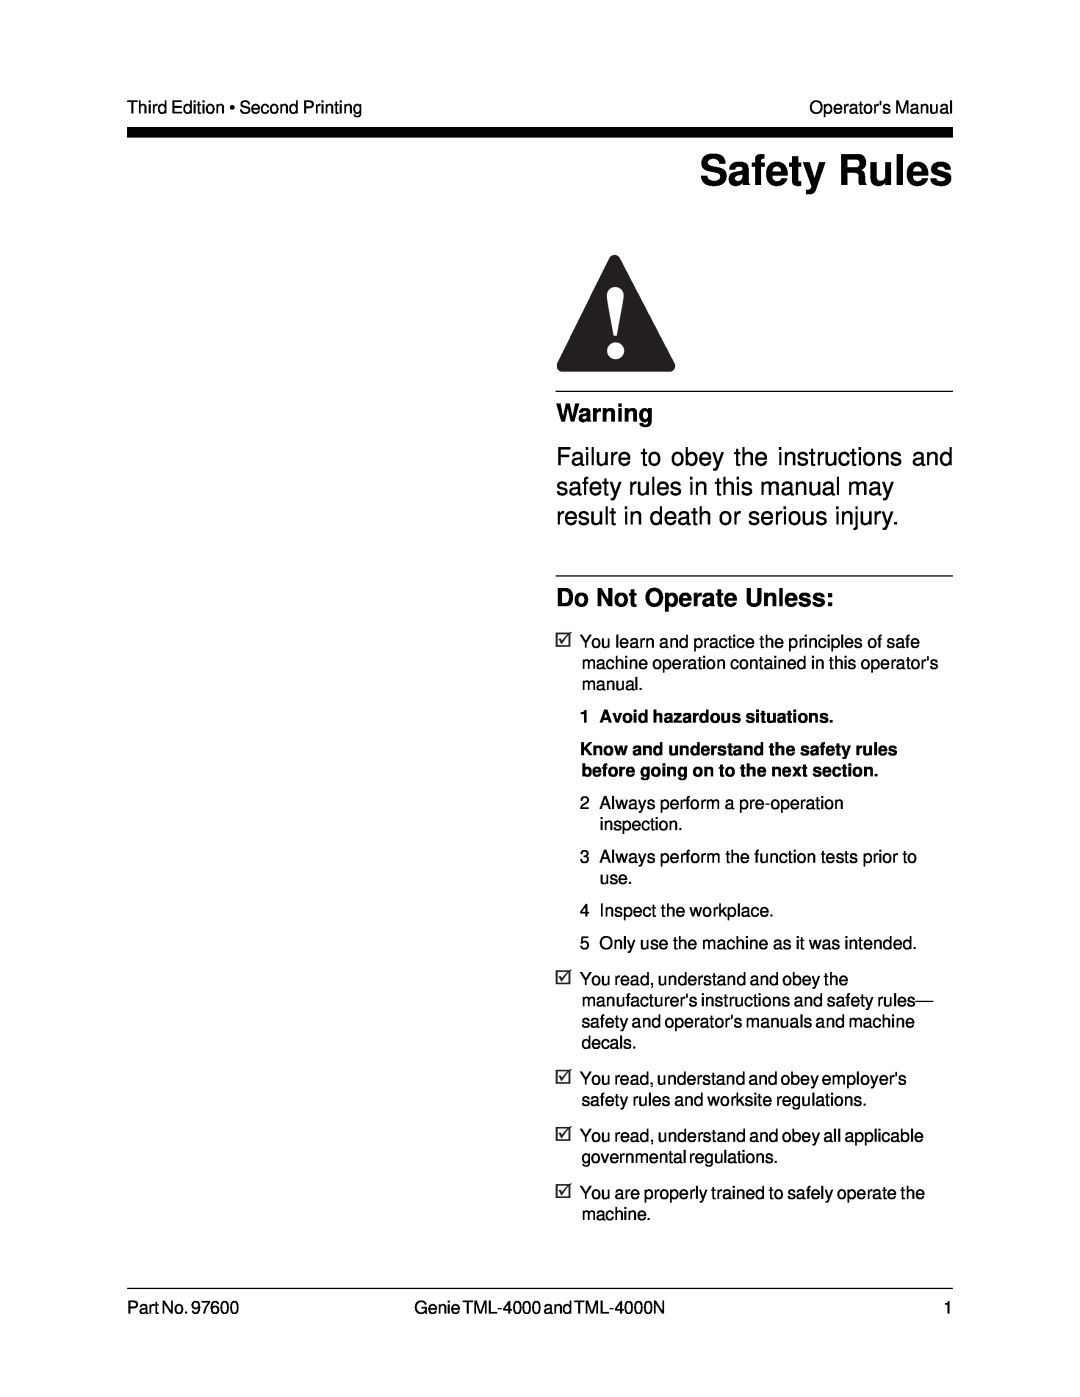 Genie TML-4000N manual Safety Rules, Do Not Operate Unless, Avoid hazardous situations 